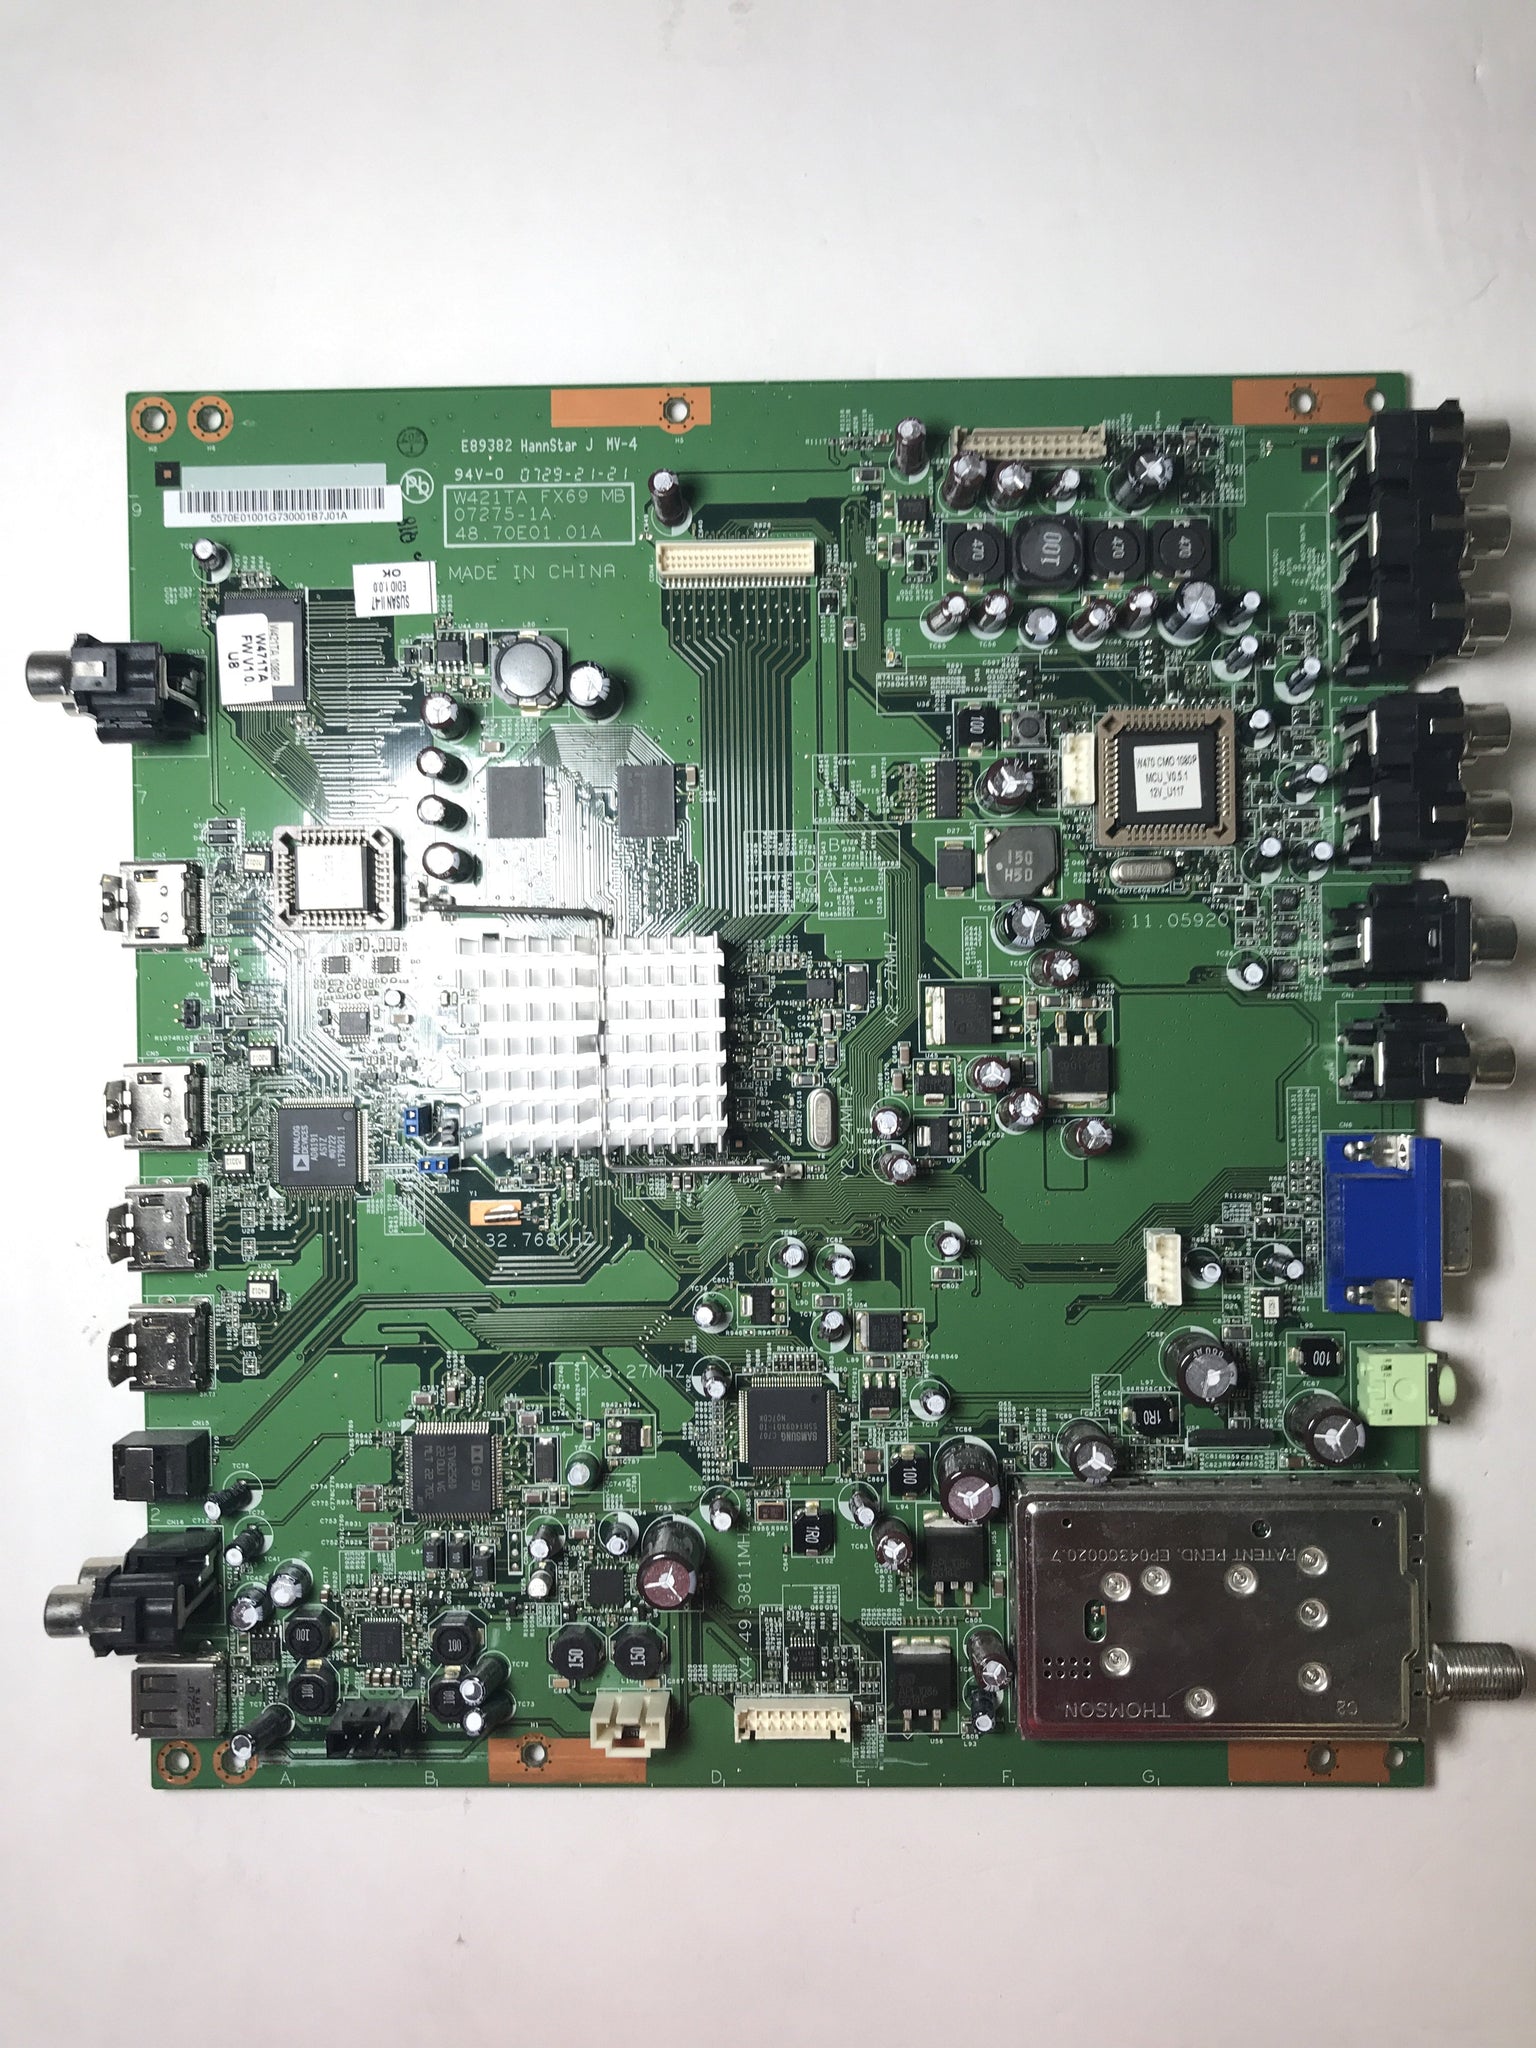 Westinghouse 55.70E01.001G Main Board for TX-42F430S (TW-51122-C042A)